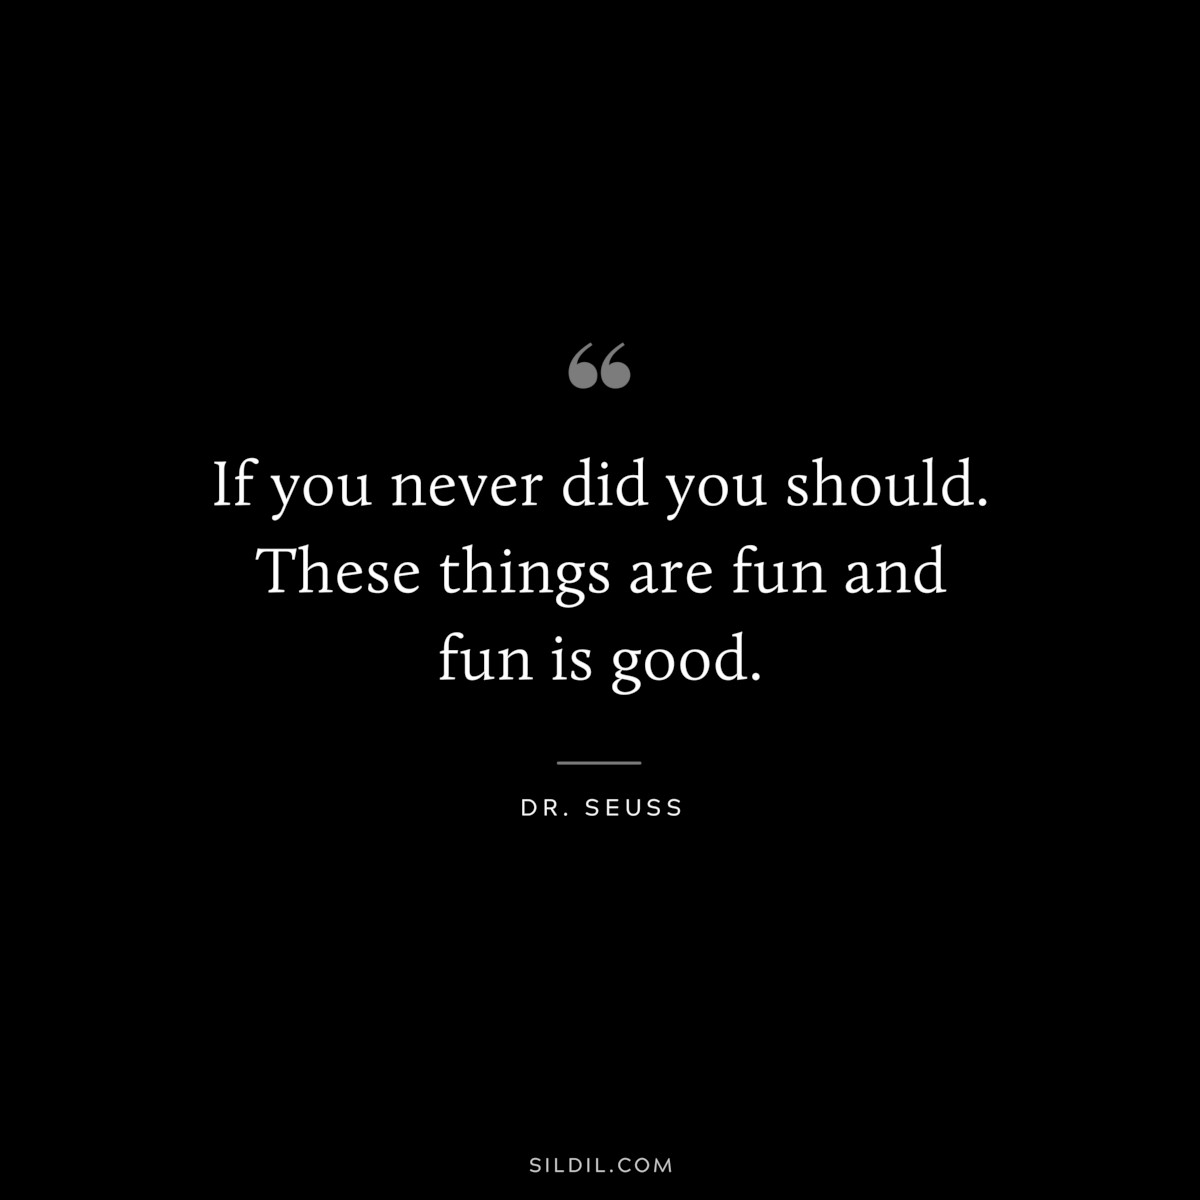 If you never did you should. These things are fun and fun is good. ― Dr. Seuss